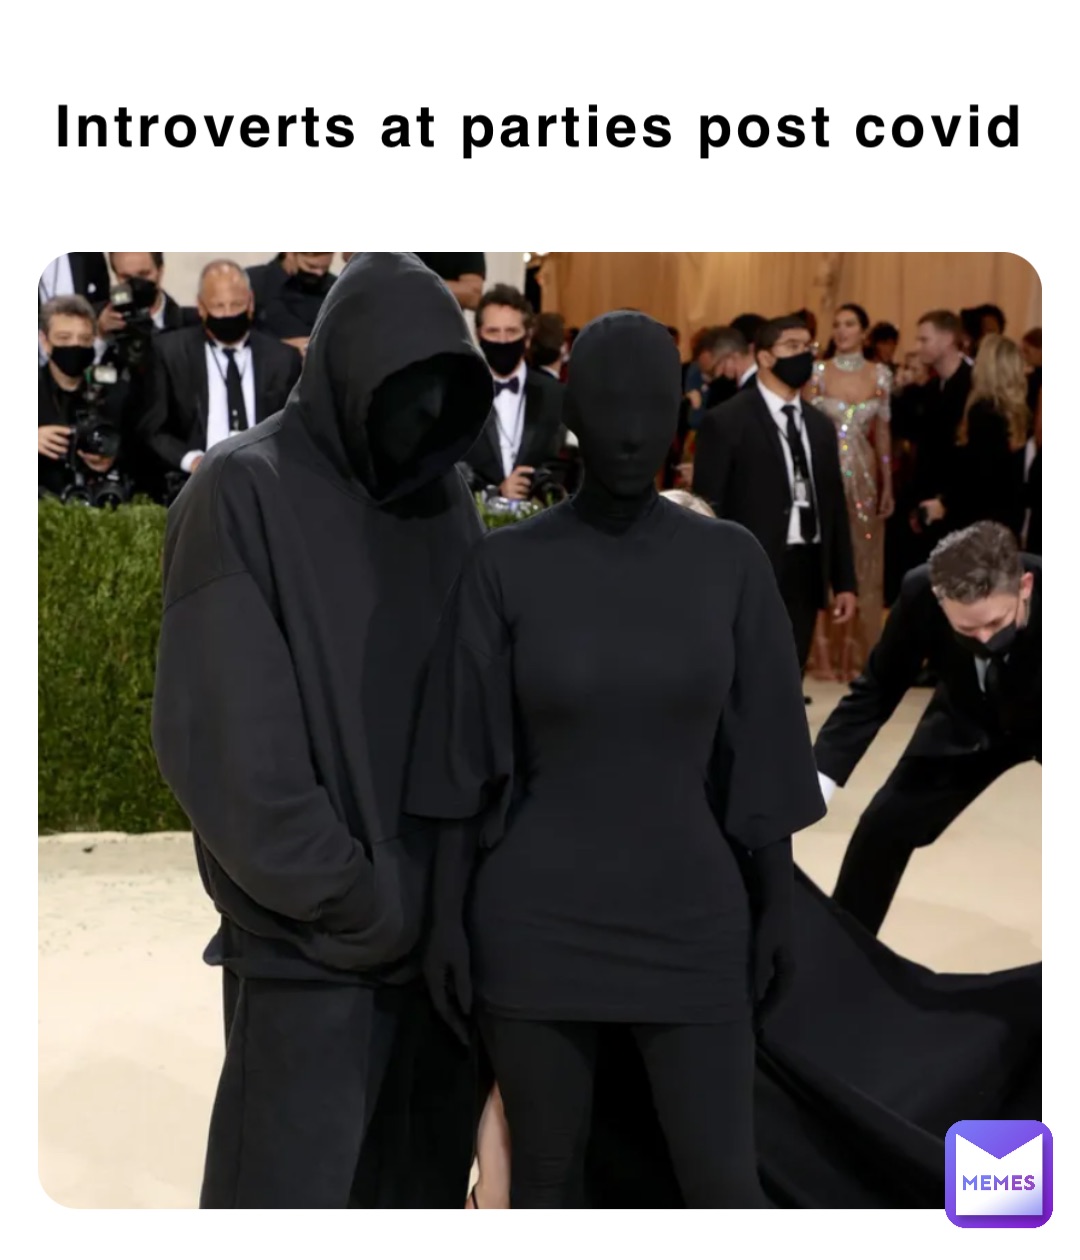 Introverts at parties post Covid